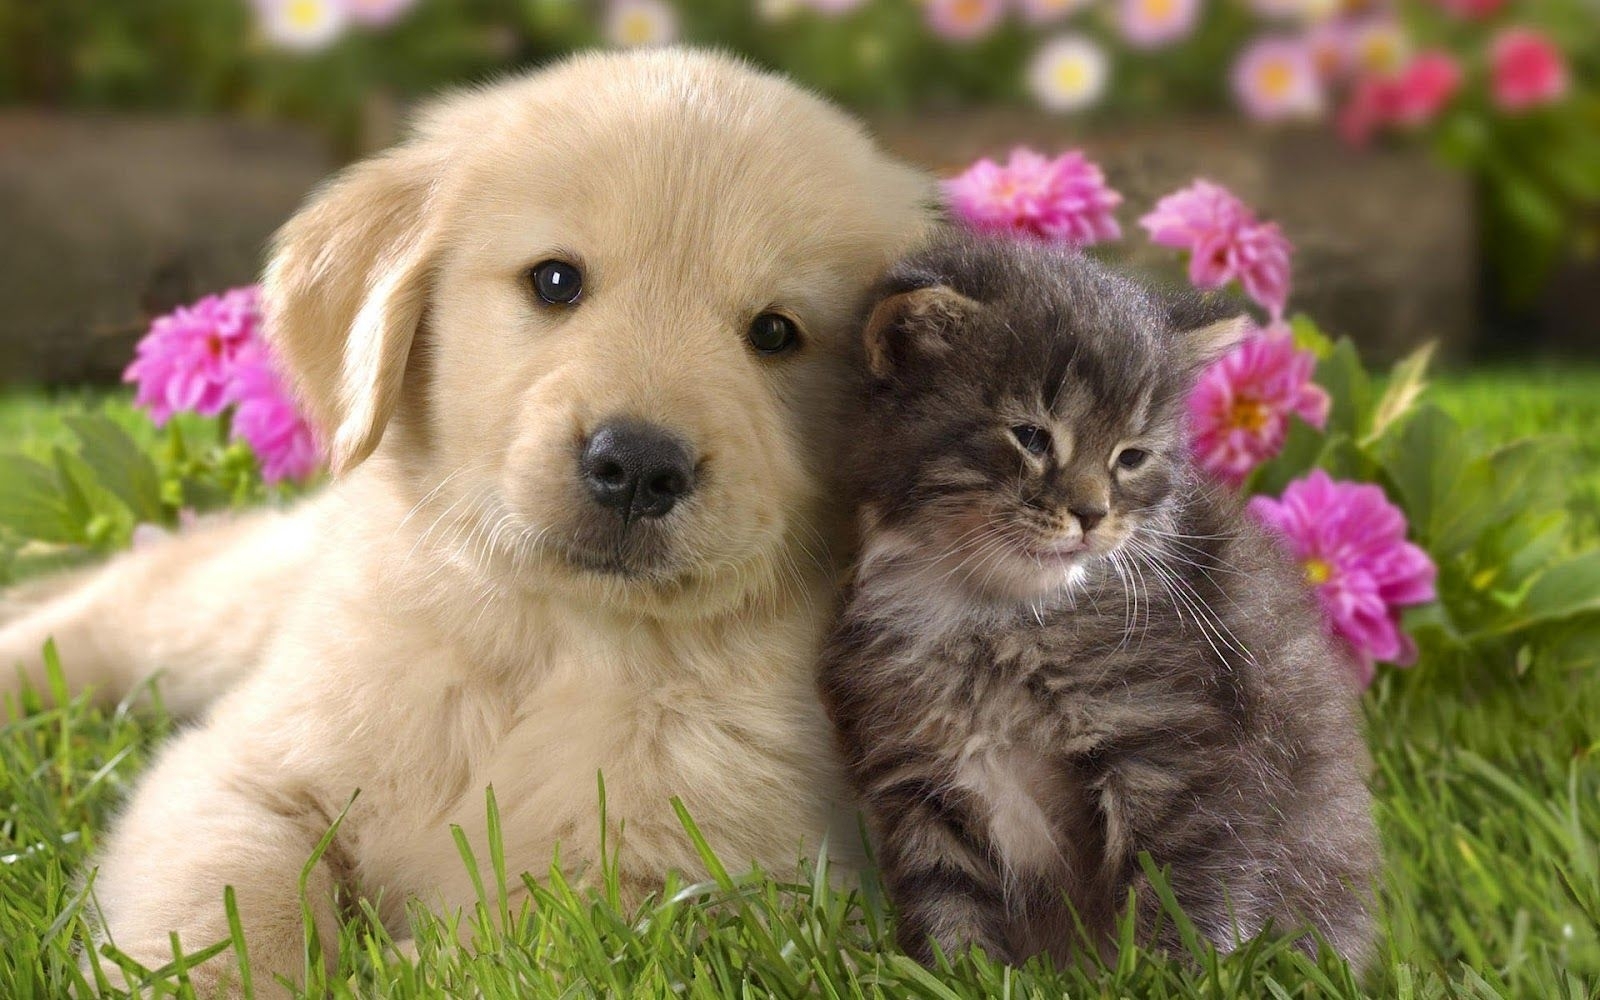 10 Latest Cute Dog And Cat Wallpaper FULL HD 1920×1080 For PC Background